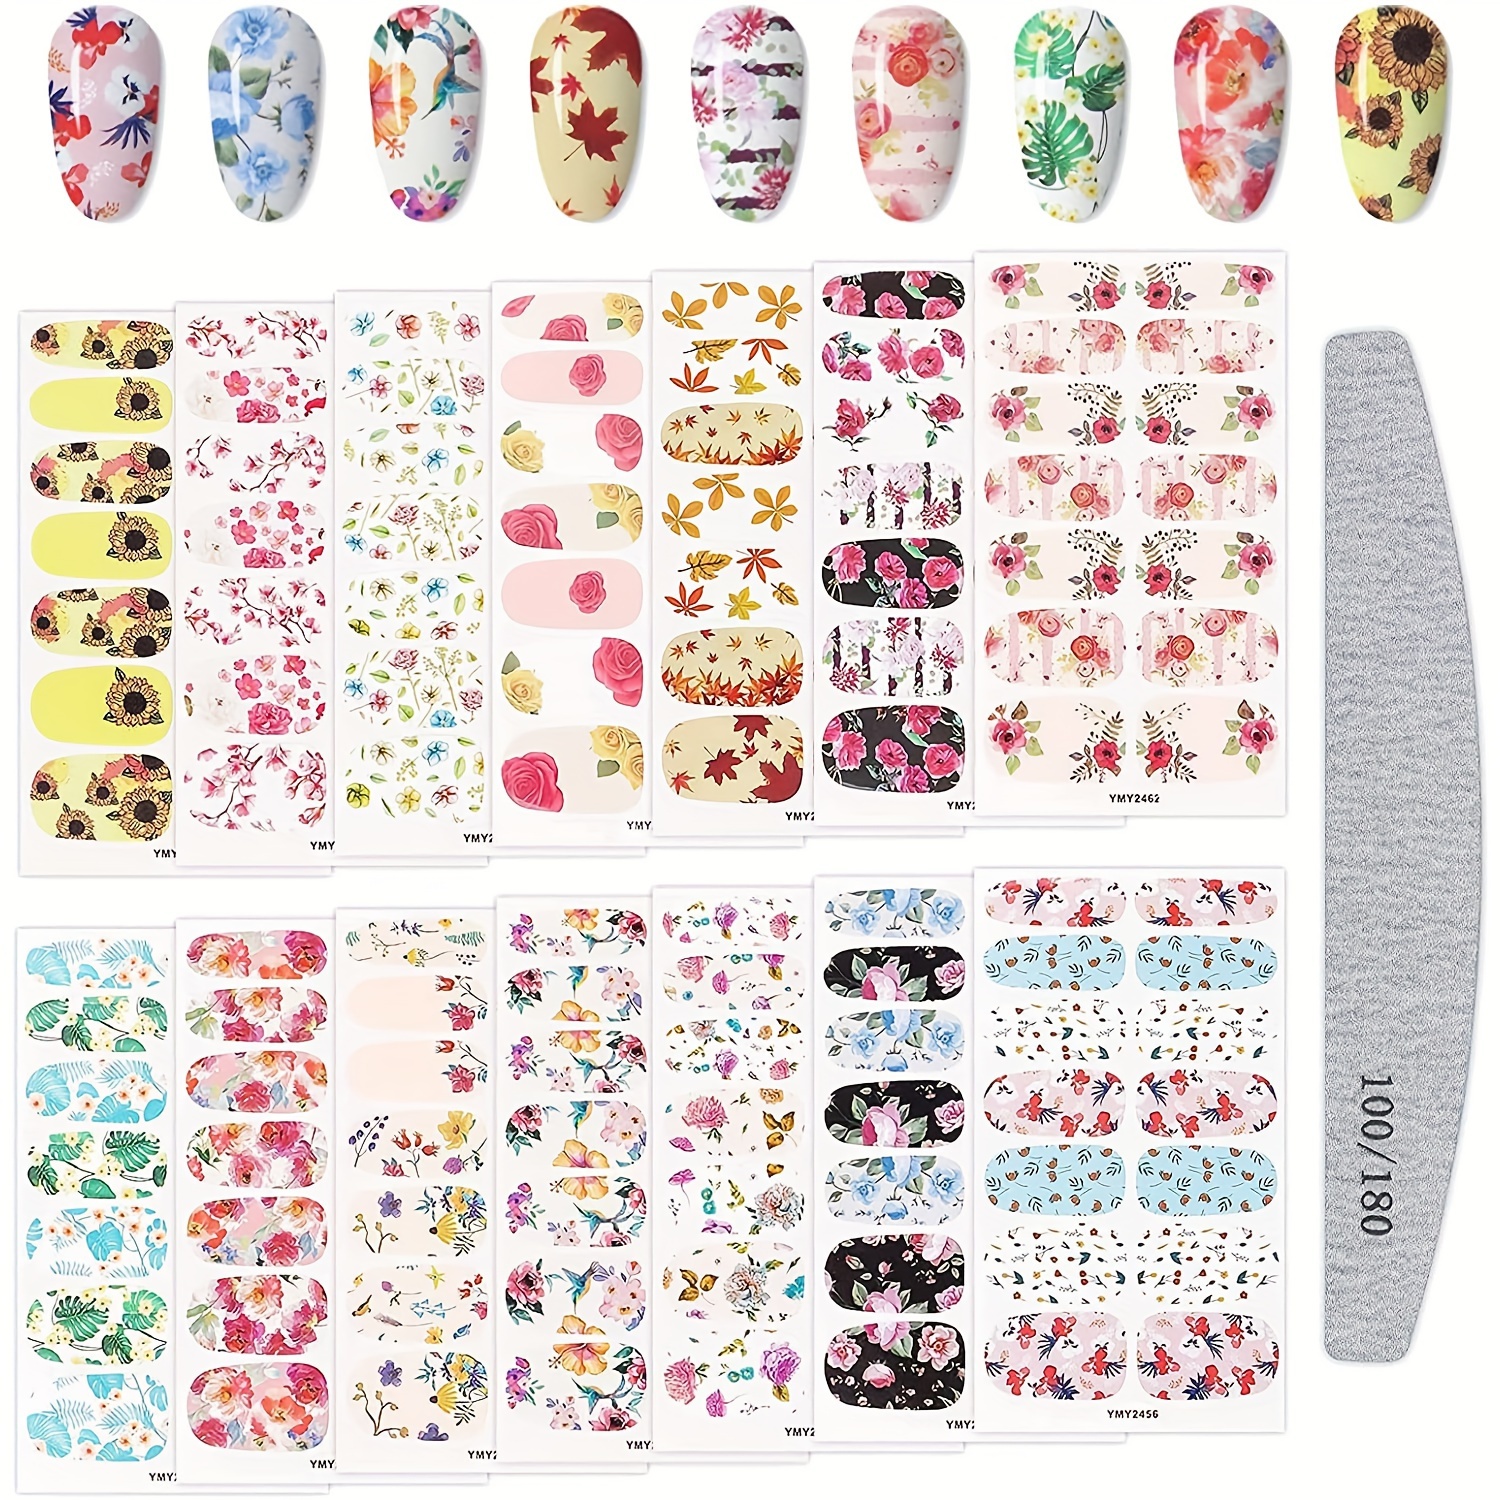 

14 Sheet Full Wrap Nail Polish Stickers With Spring Flower Design, Nail Strips Self-adhesive Gel Nail Strips,nail Art Decals For Home Women Girls Nail Decorations + A Nail File